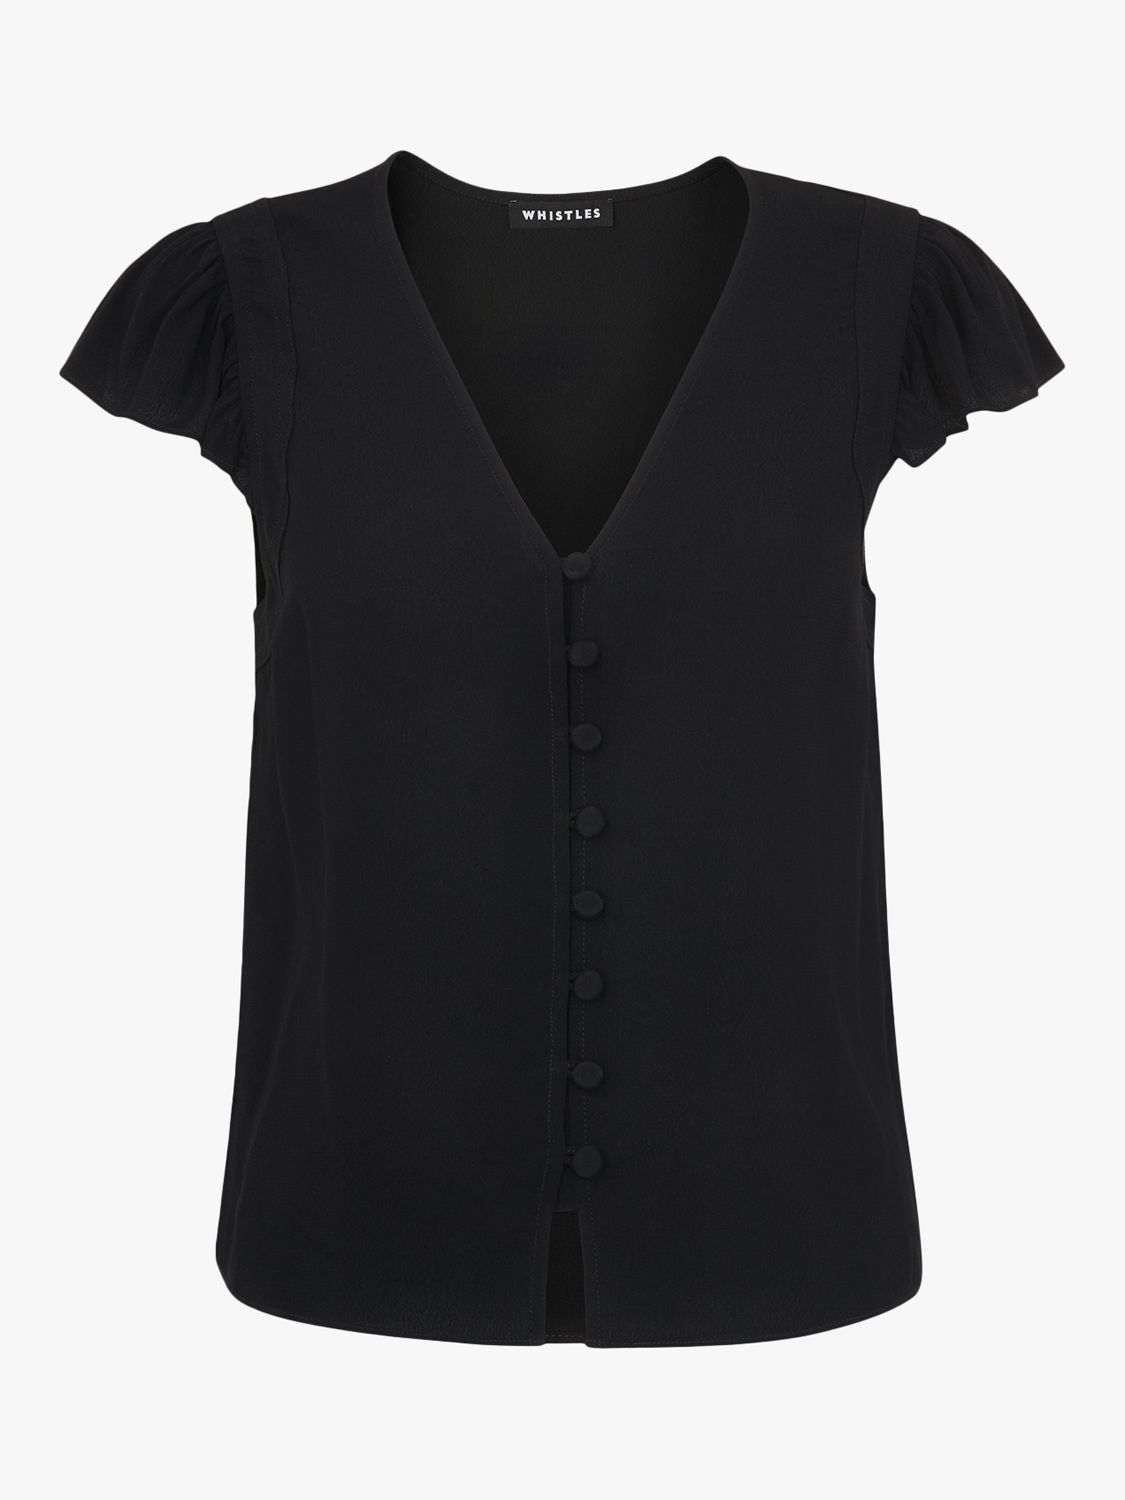 Buy Whistles Frill Sleeve Top Online at johnlewis.com